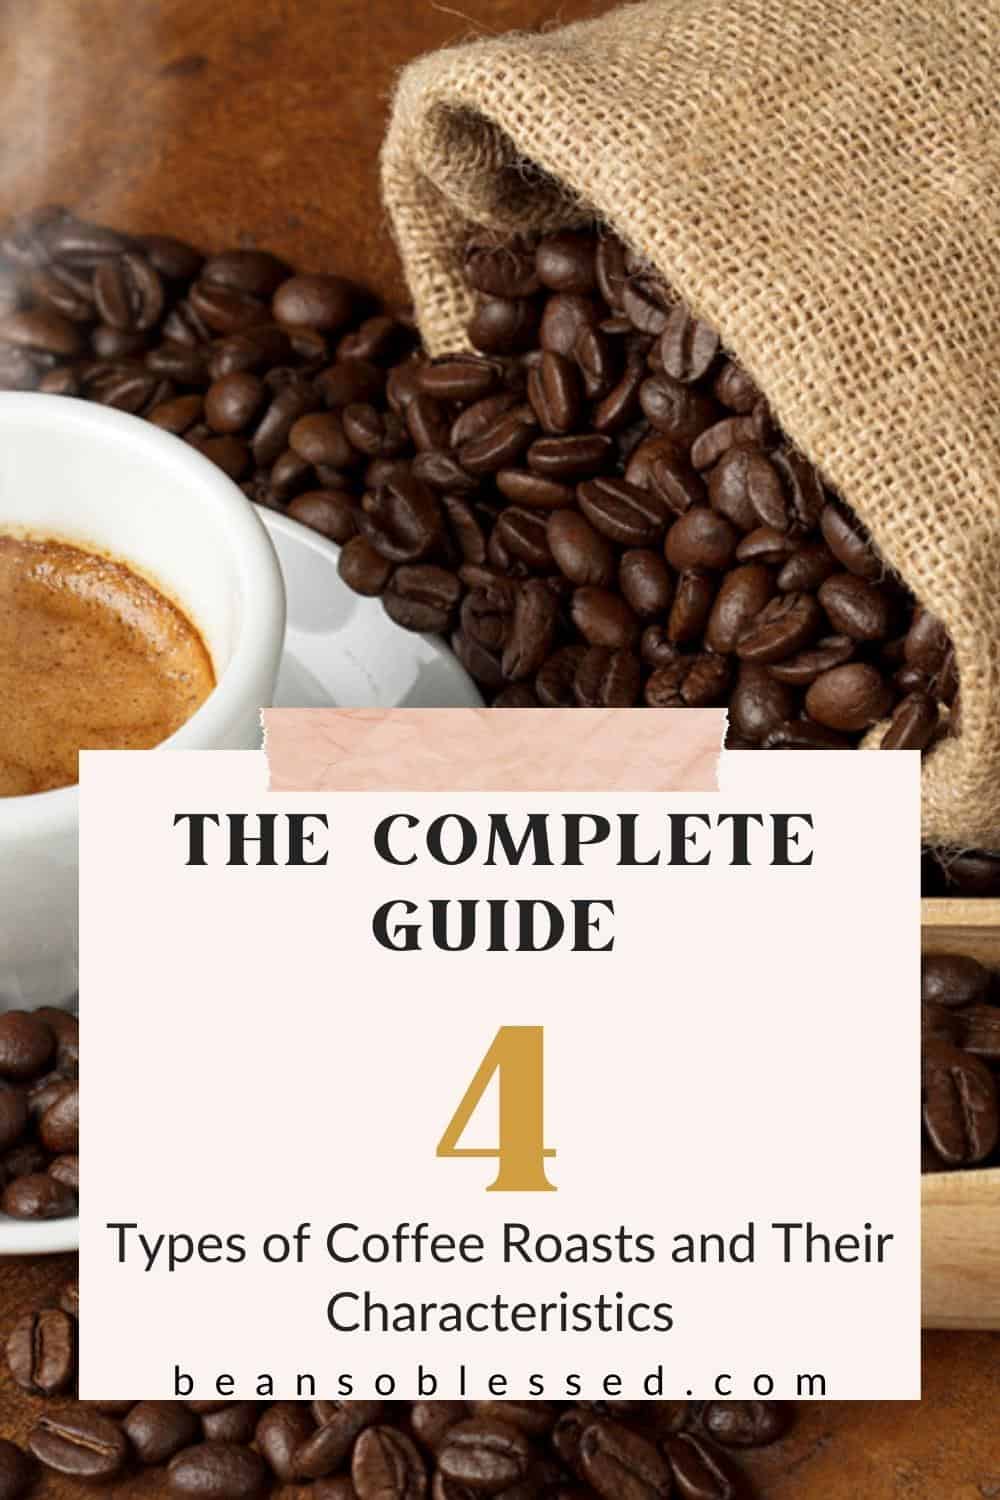 image of coffee cup and beans for postThe Complete Guide To 4 Types of Coffee Roasts and their Characteristics